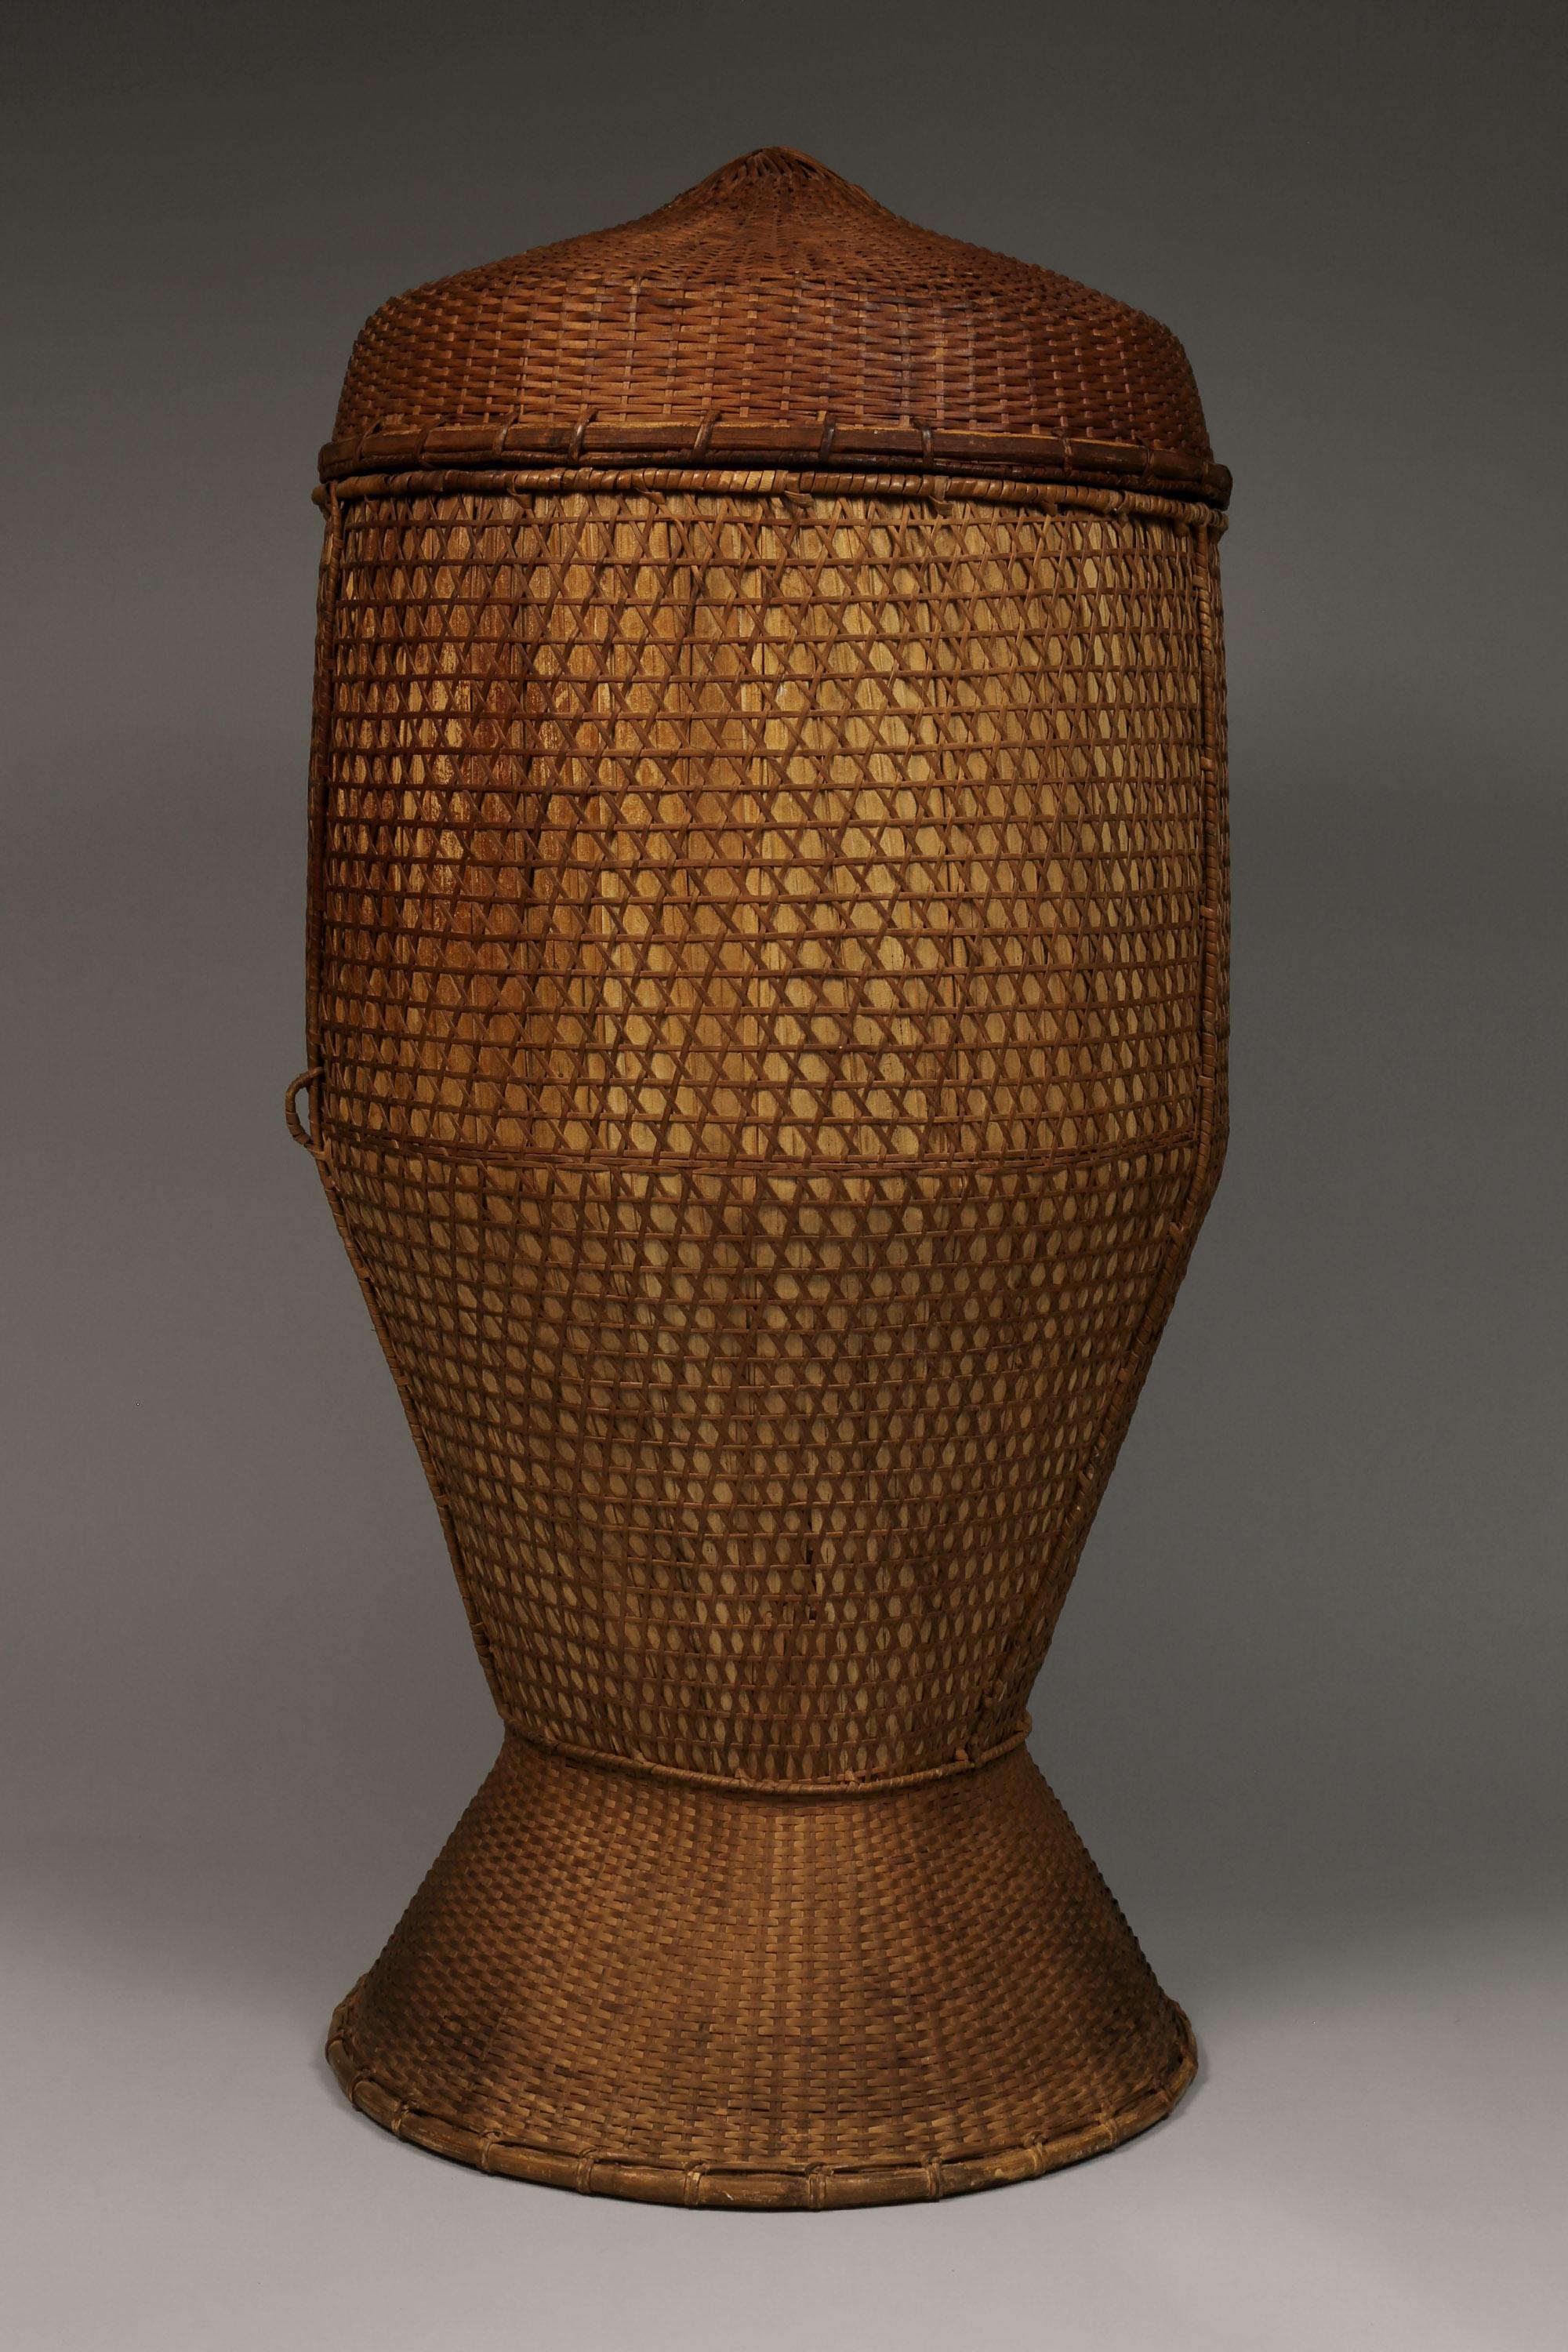 Bamboo Pair of Large Vintage Grain Storage Baskets, Thailand, Mid-20th Century